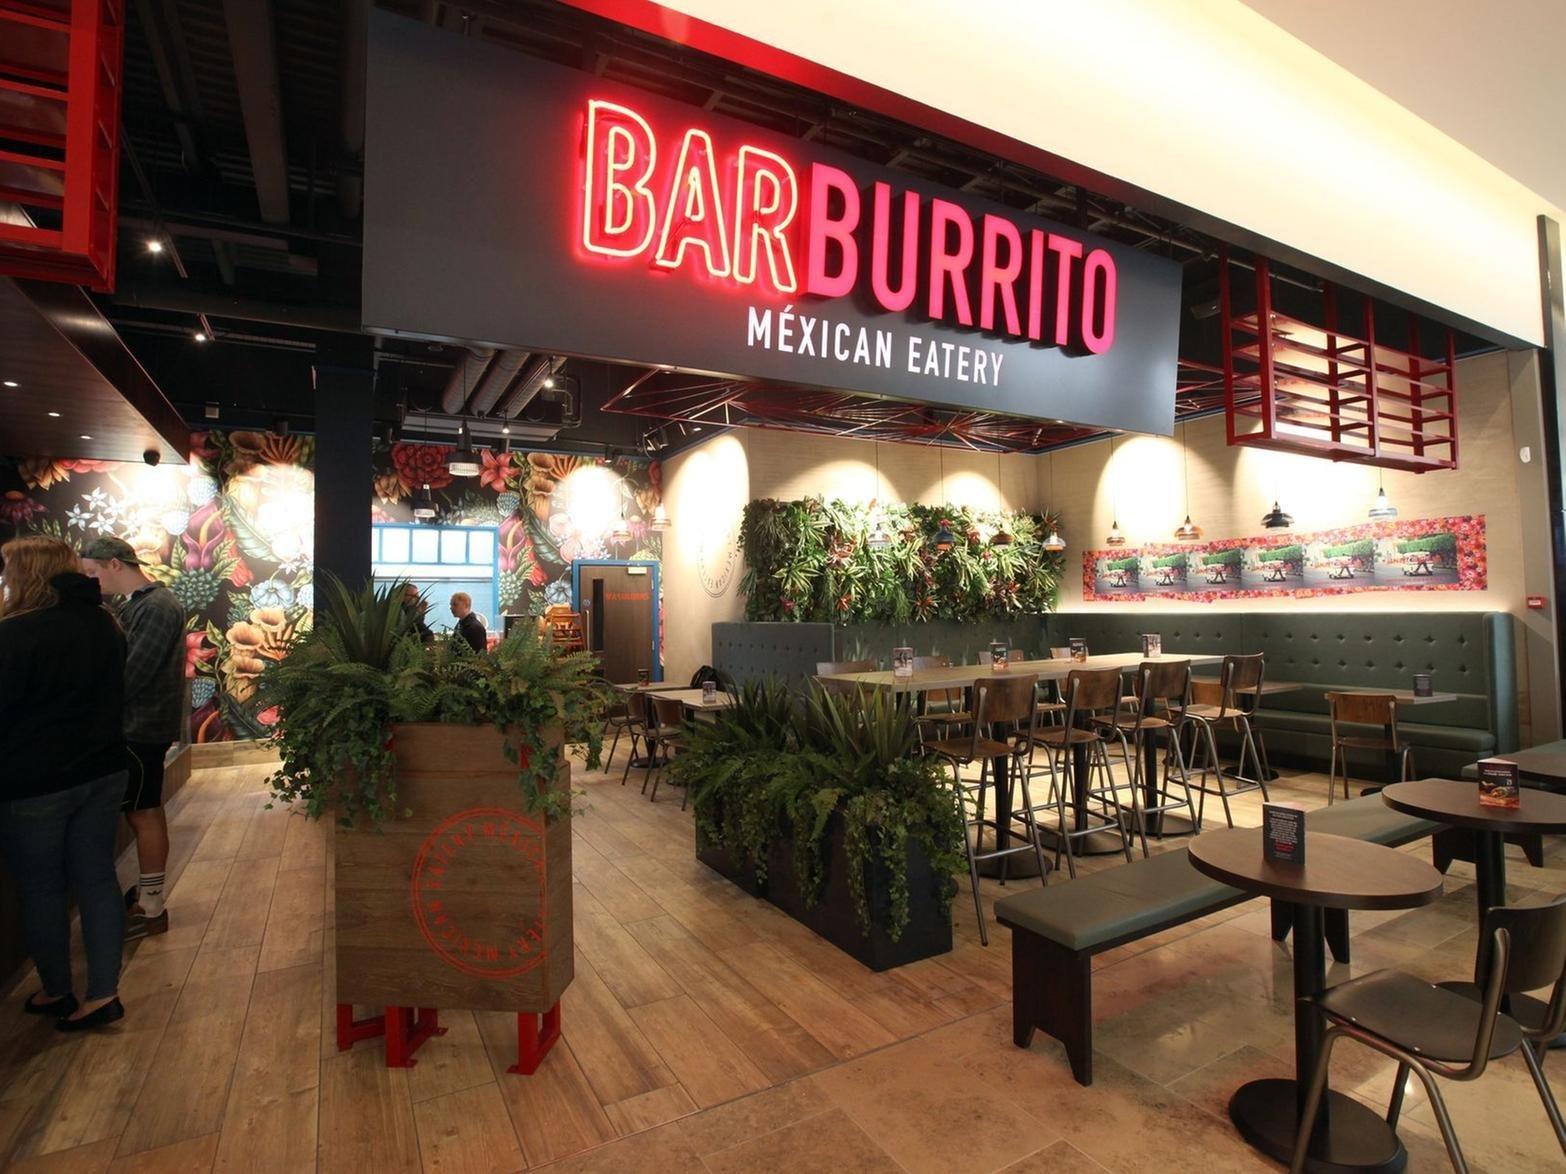 Since it was founded in 2005, Barburrito has been a huge success, and now operates 21 stores across the country. Could they set their sights on Pontefract or Castleford next?